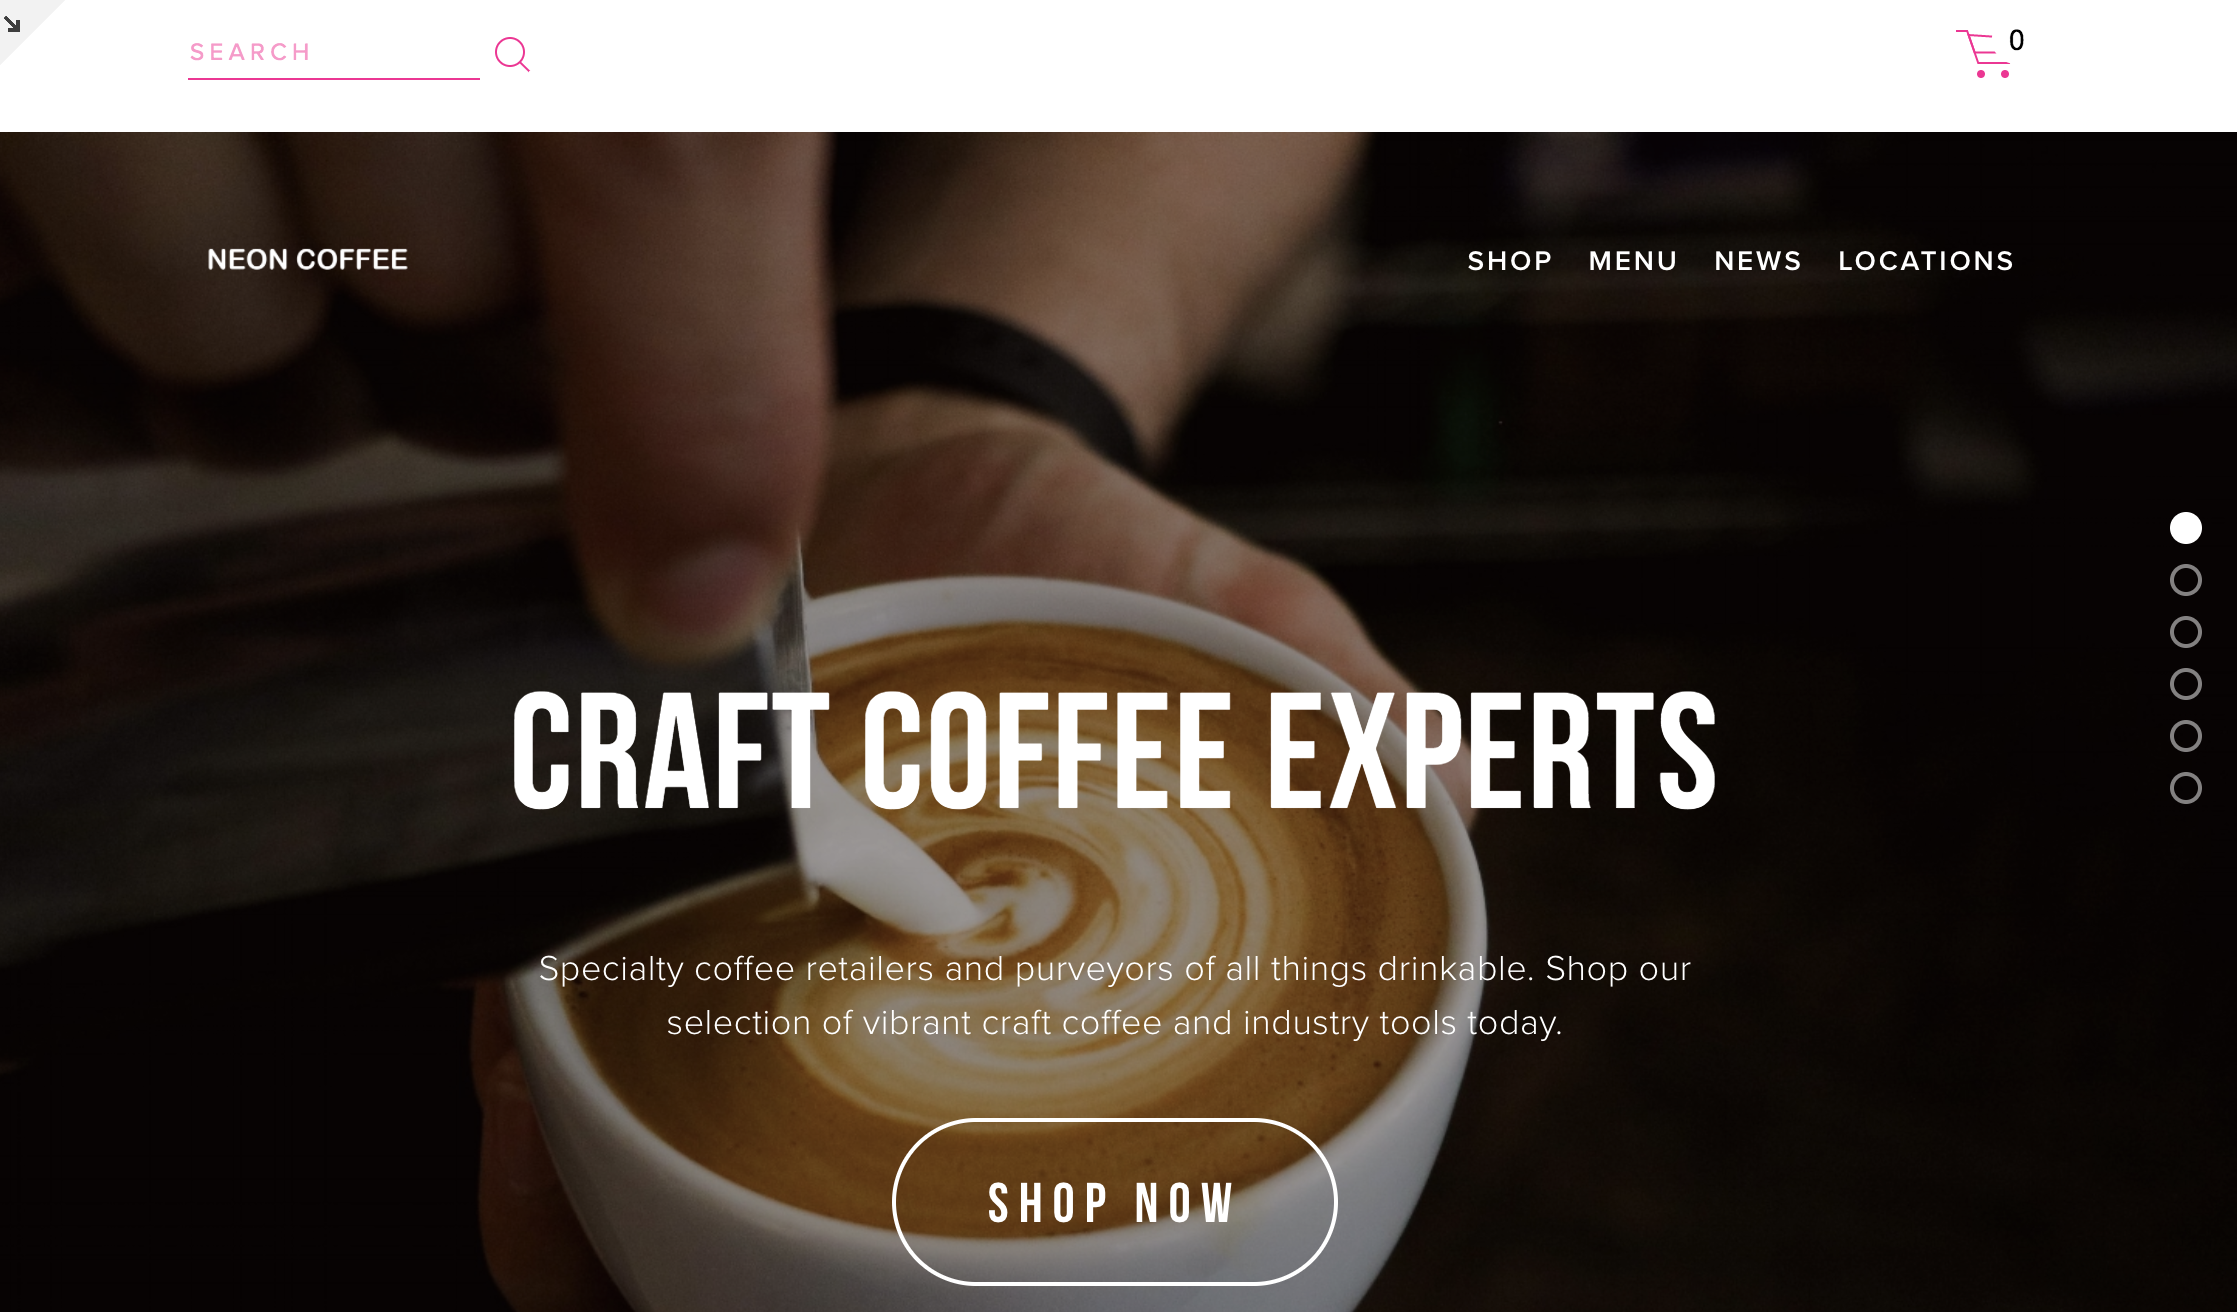 Neon Coffee Company trusted the Good Marketing Company to do their SEO and web design